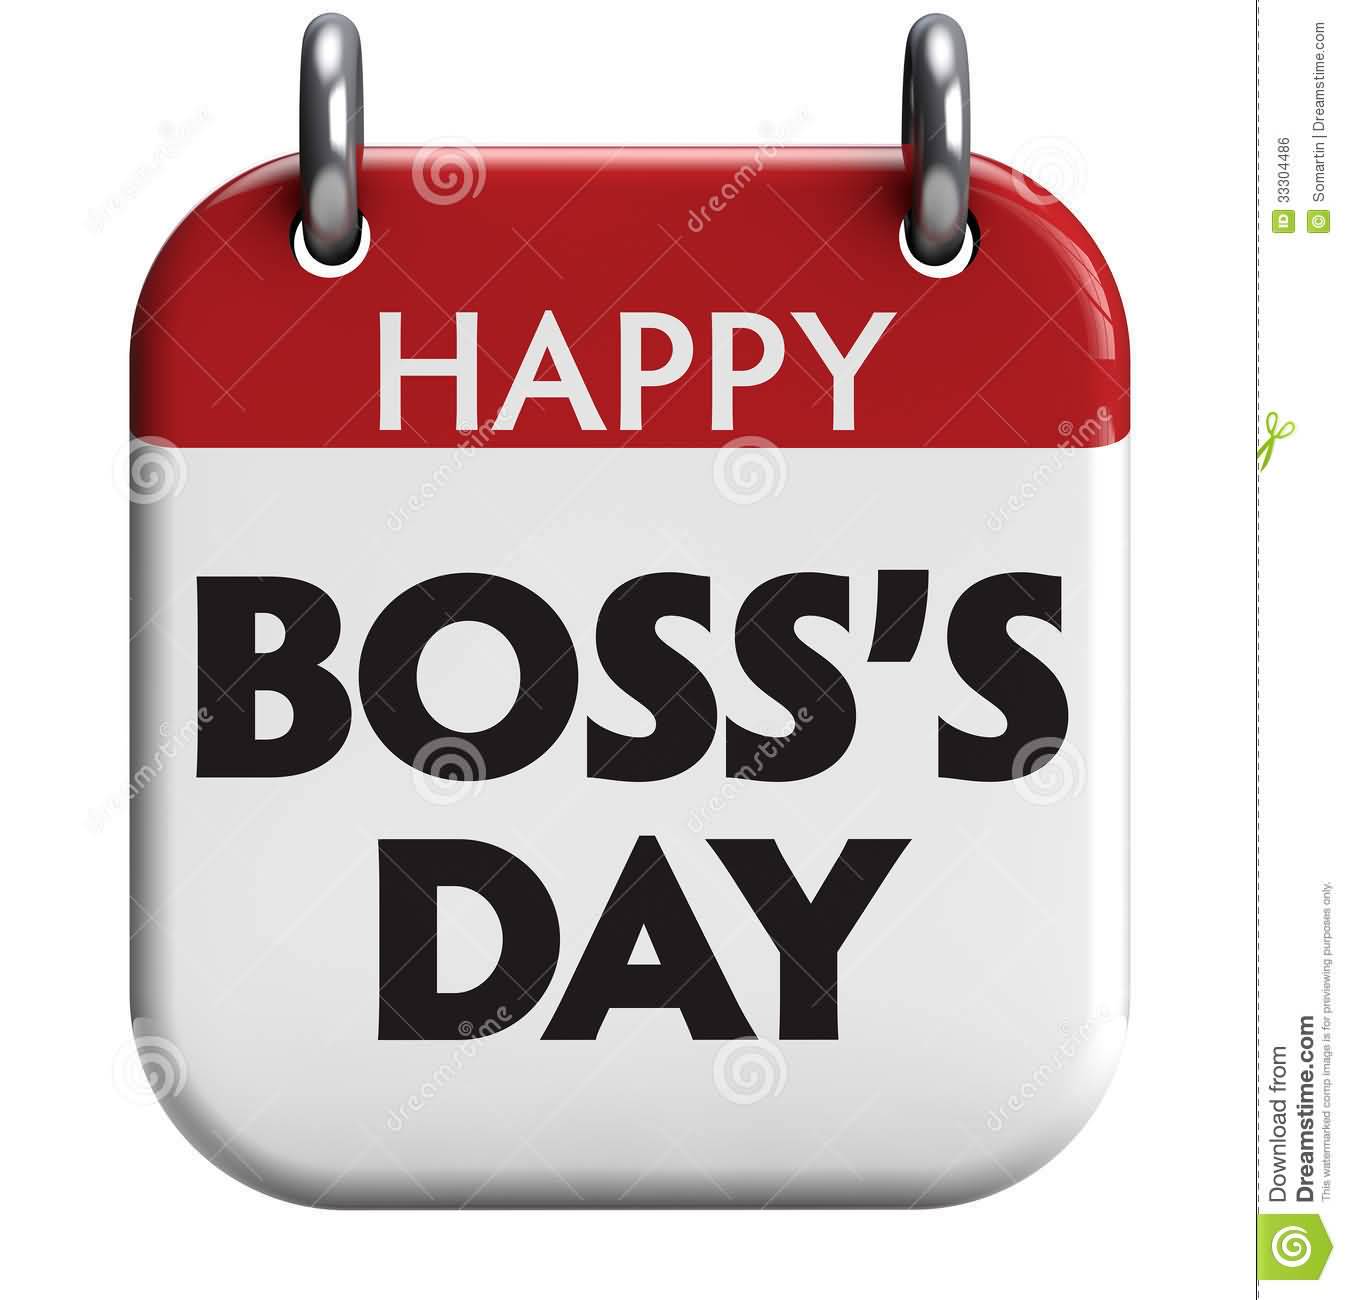 50 Happy Boss\'s Day Wishes Pictures And Images.